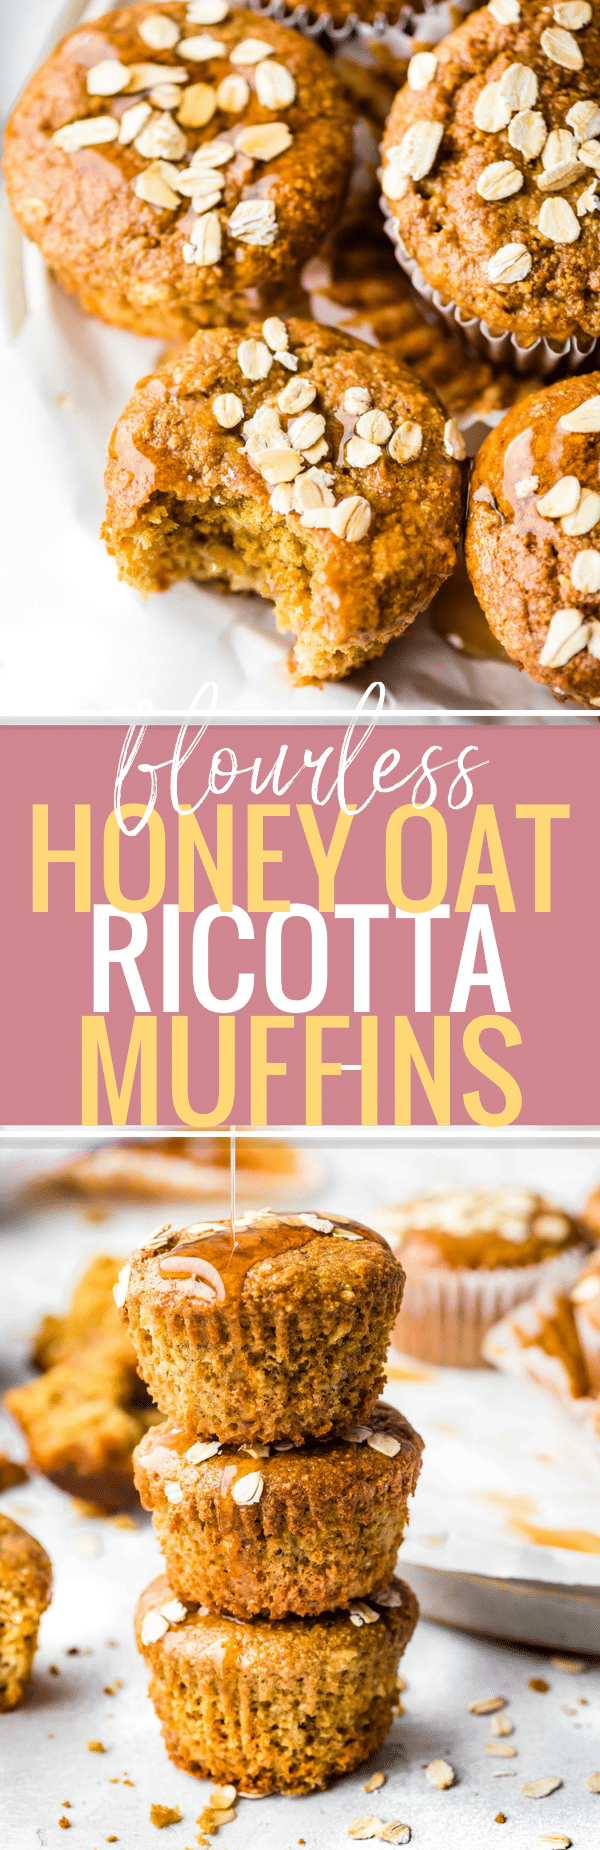 These Flourless Honey Oat Ricotta Muffins are easy to make for a healthy breakfast or snack! A Gluten-free Ricotta Muffins recipe that's honey sweetened and rich in protein, fiber, and calcium. Flourless baking made quick and simple. www.cottercrunch.com